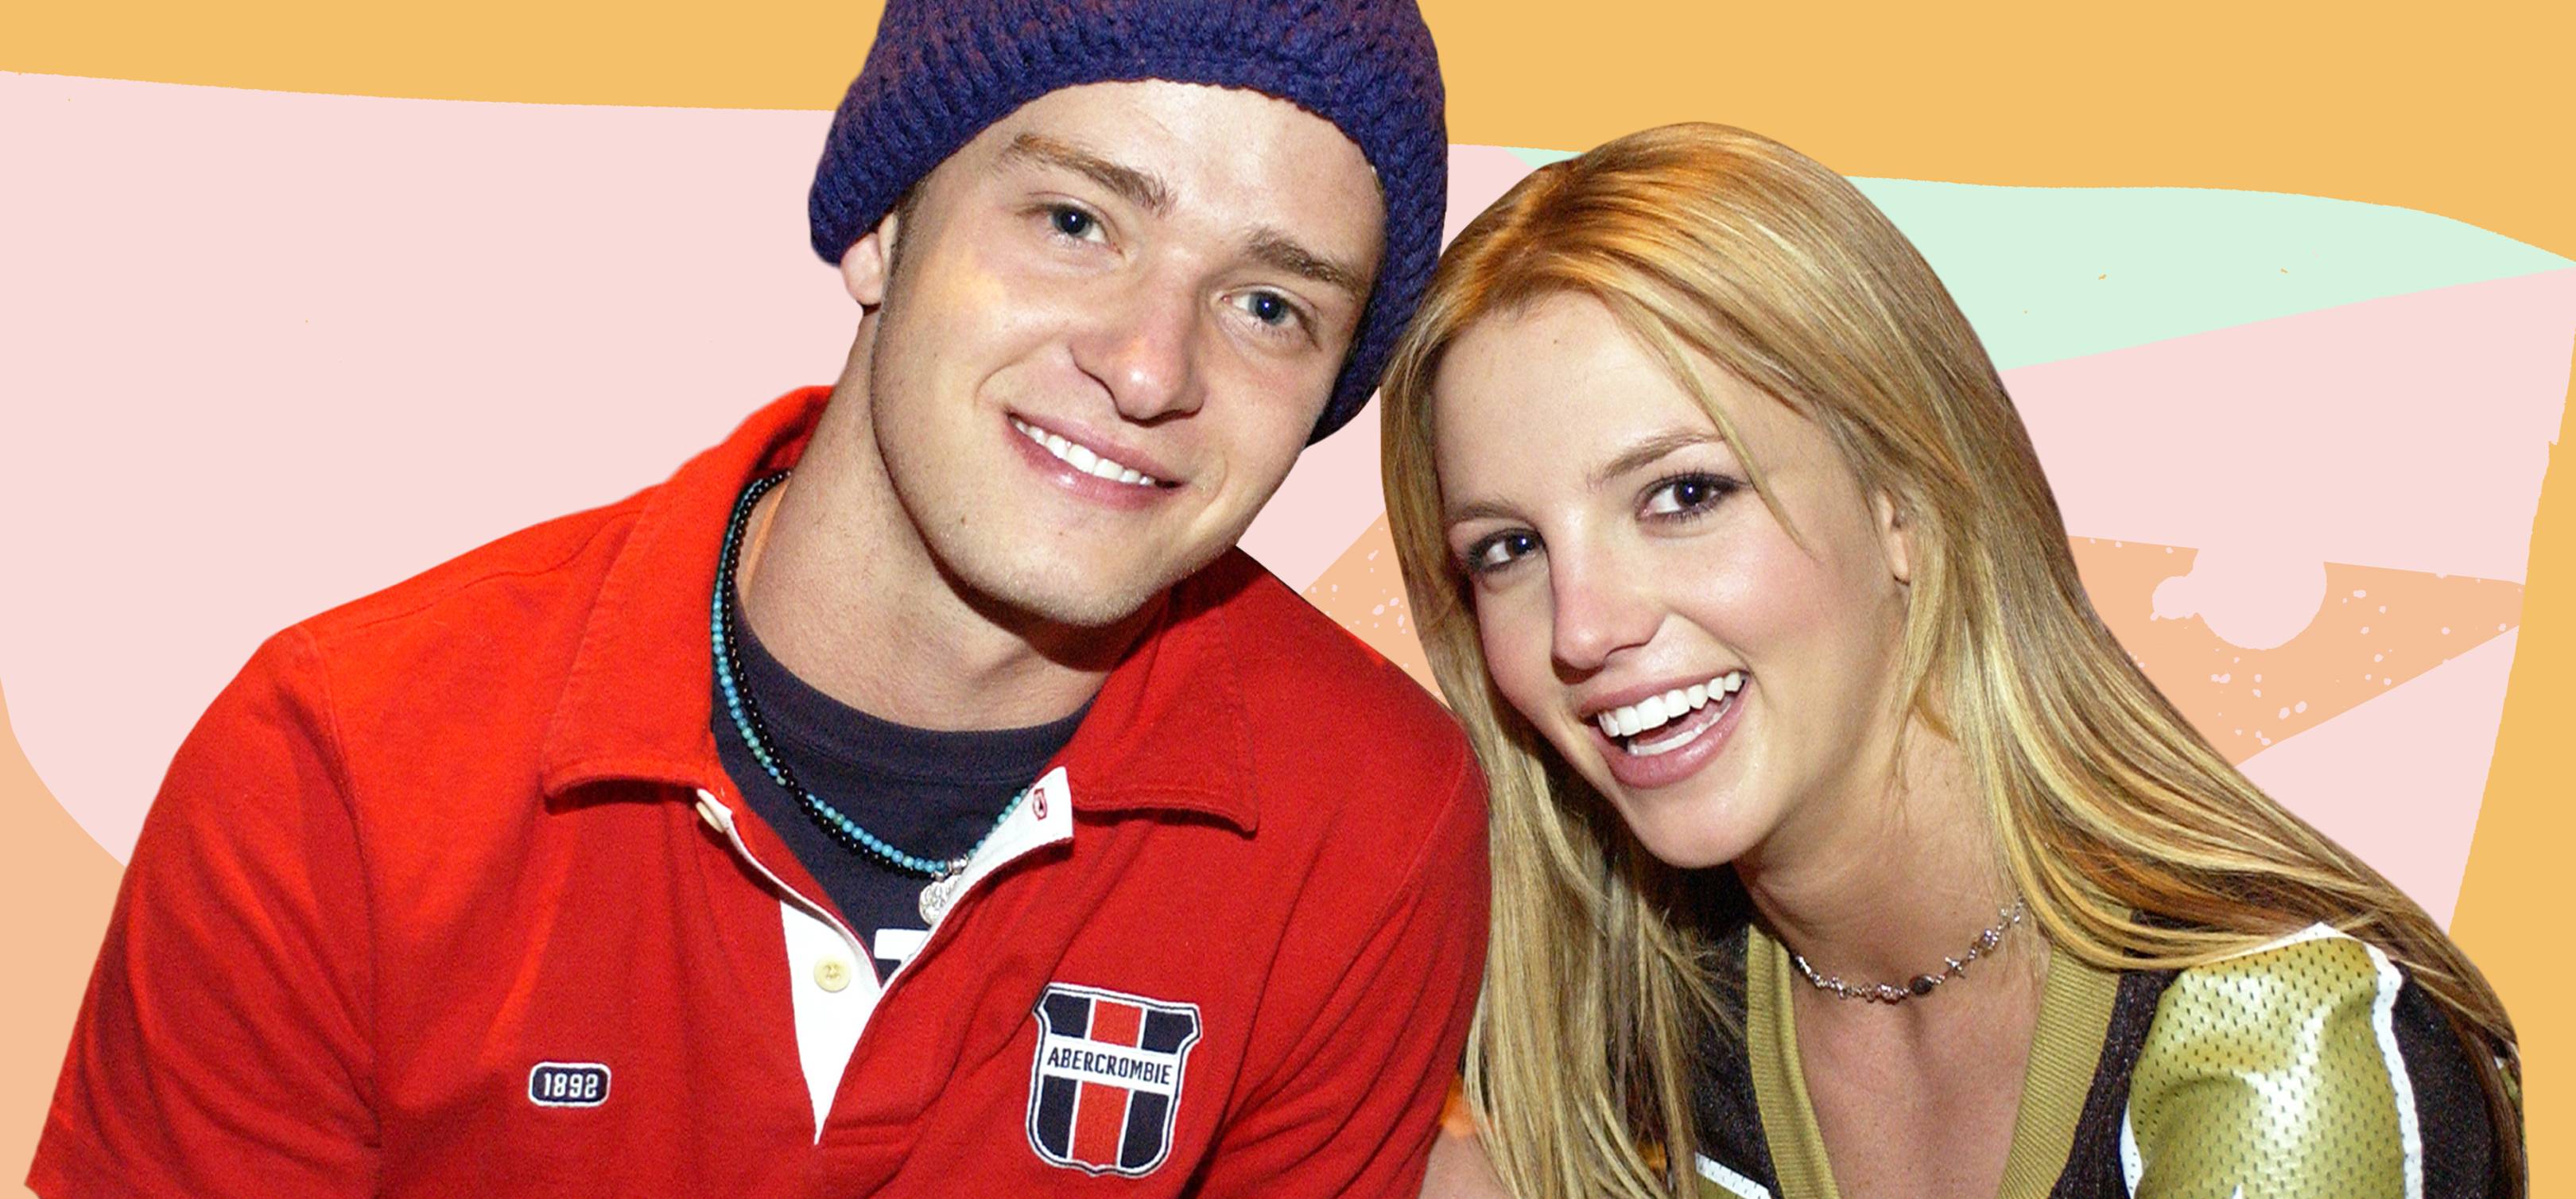 Did britney with on justin who cheat Britney Spears